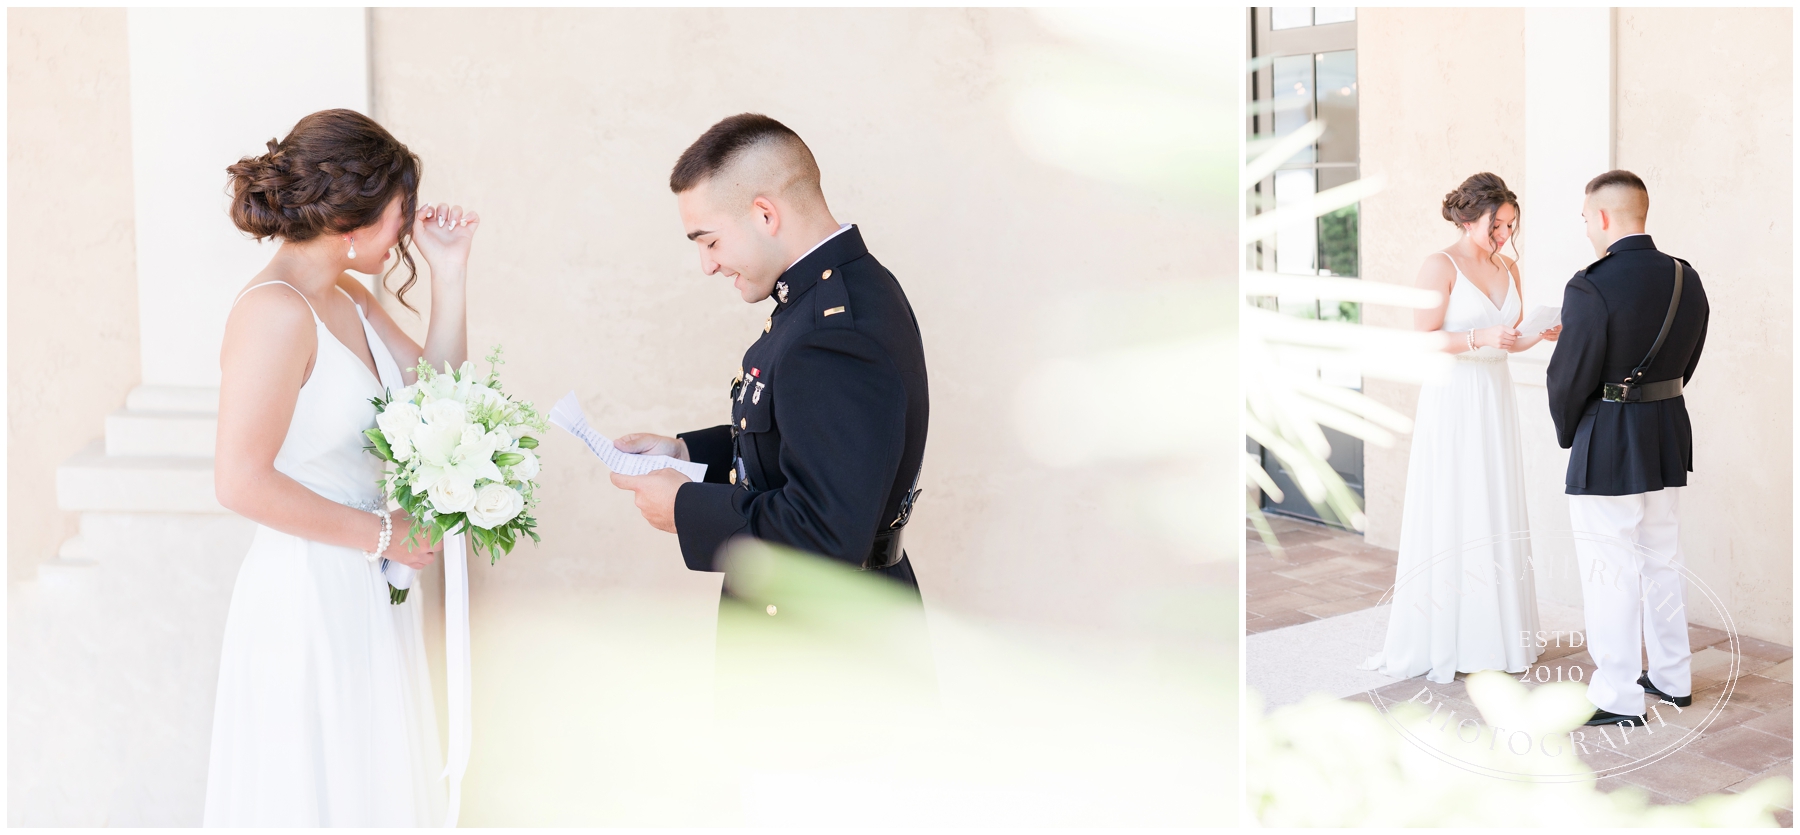 Portraits of Bride and Groom Marines Courtyard cerenony